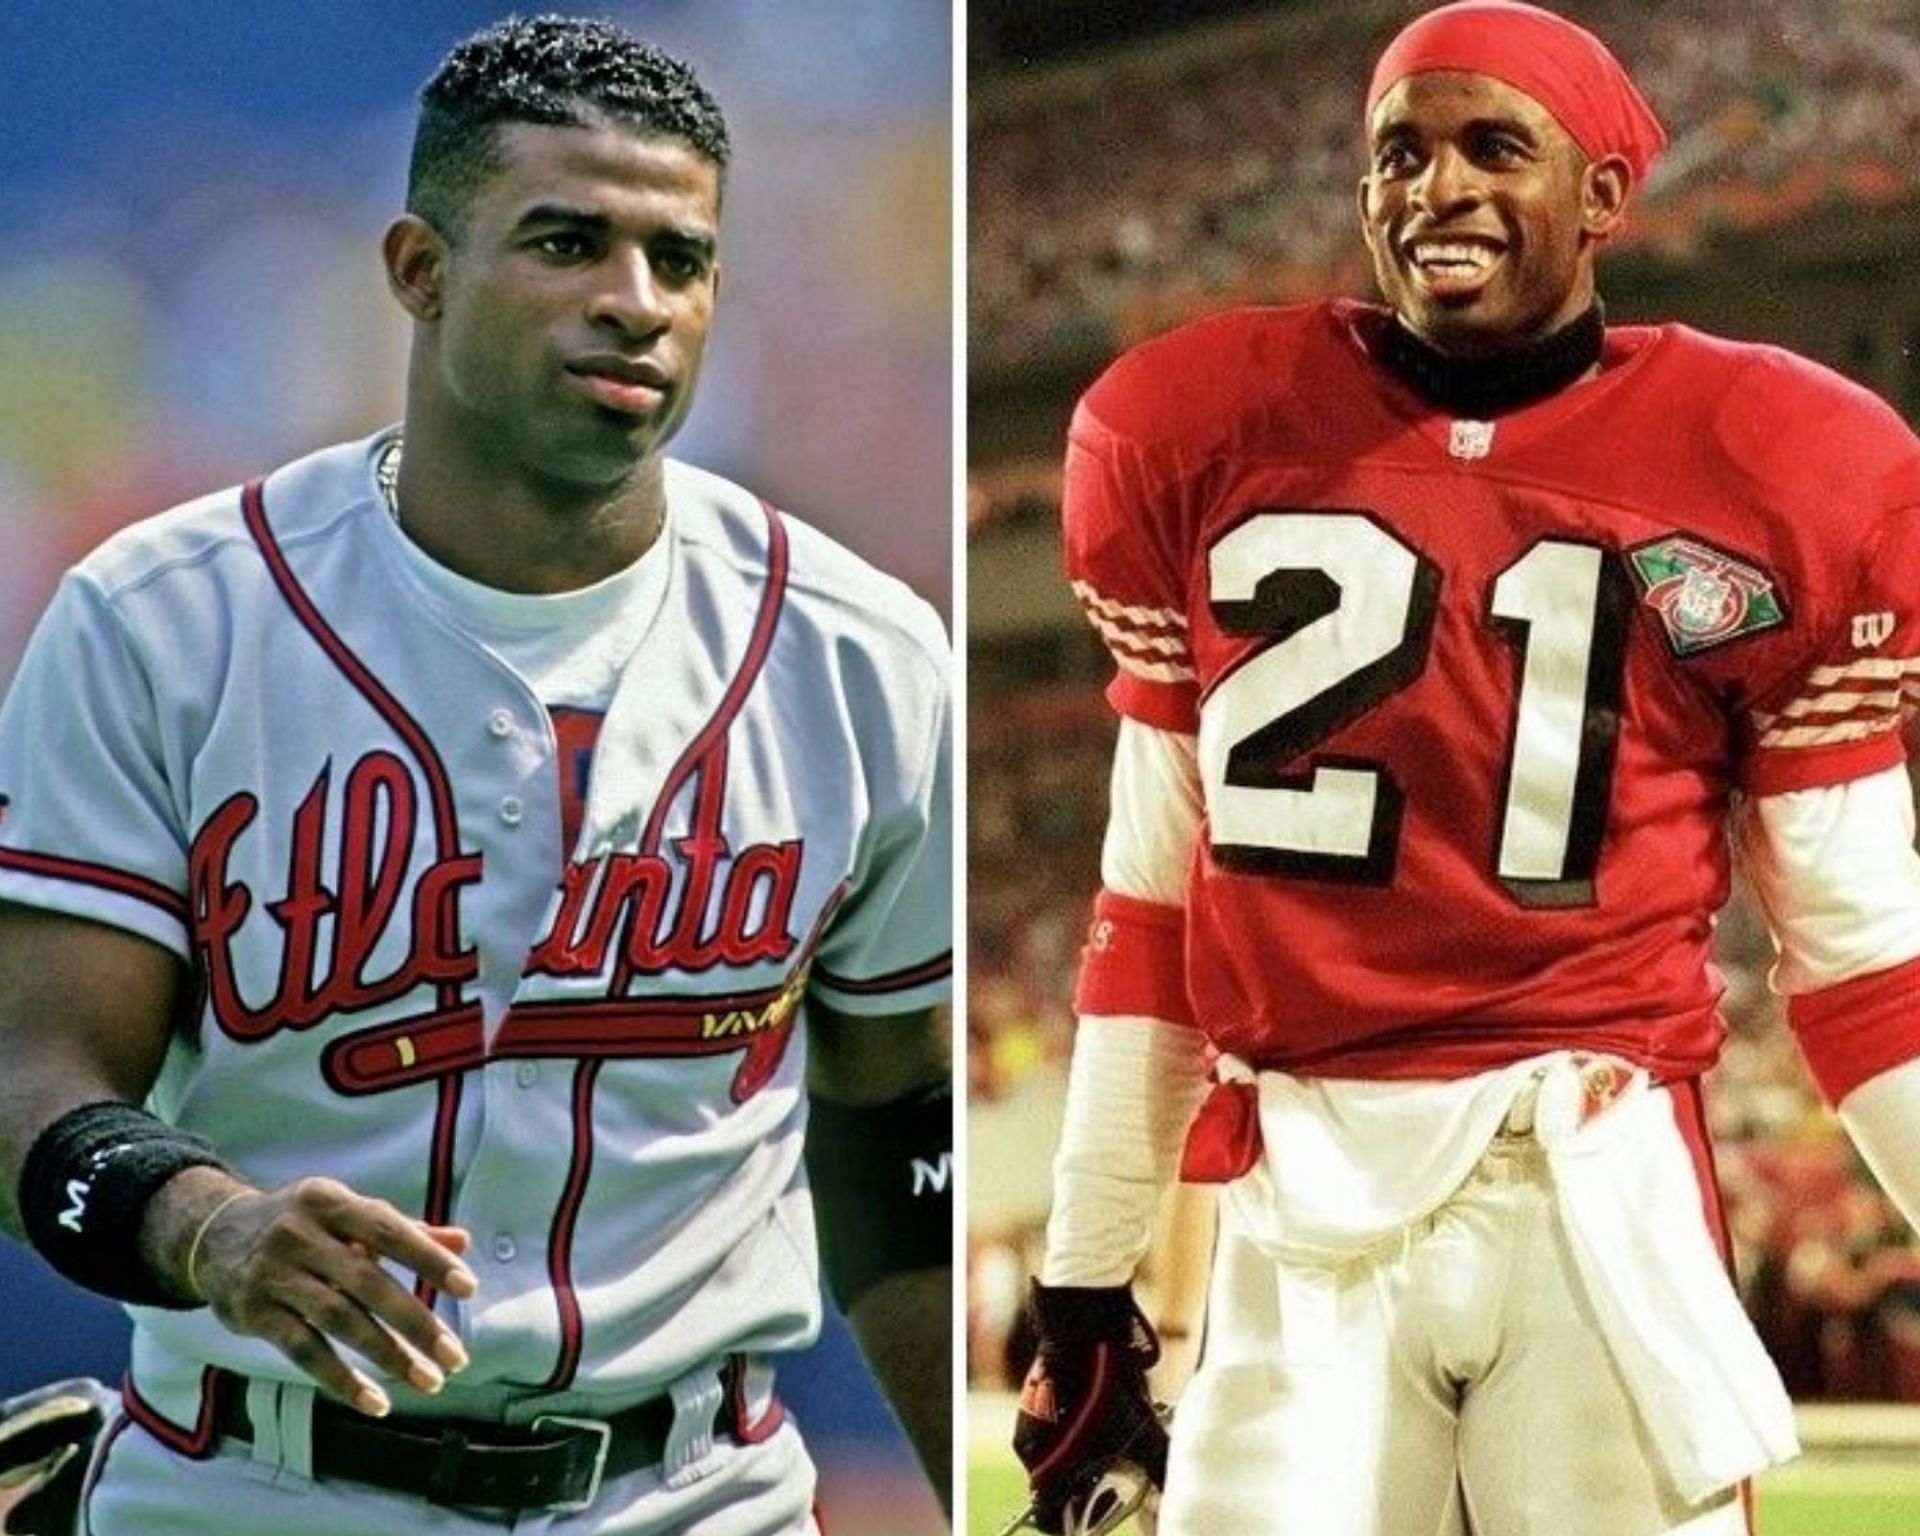 Deion Sanders during his NFL and MLB career